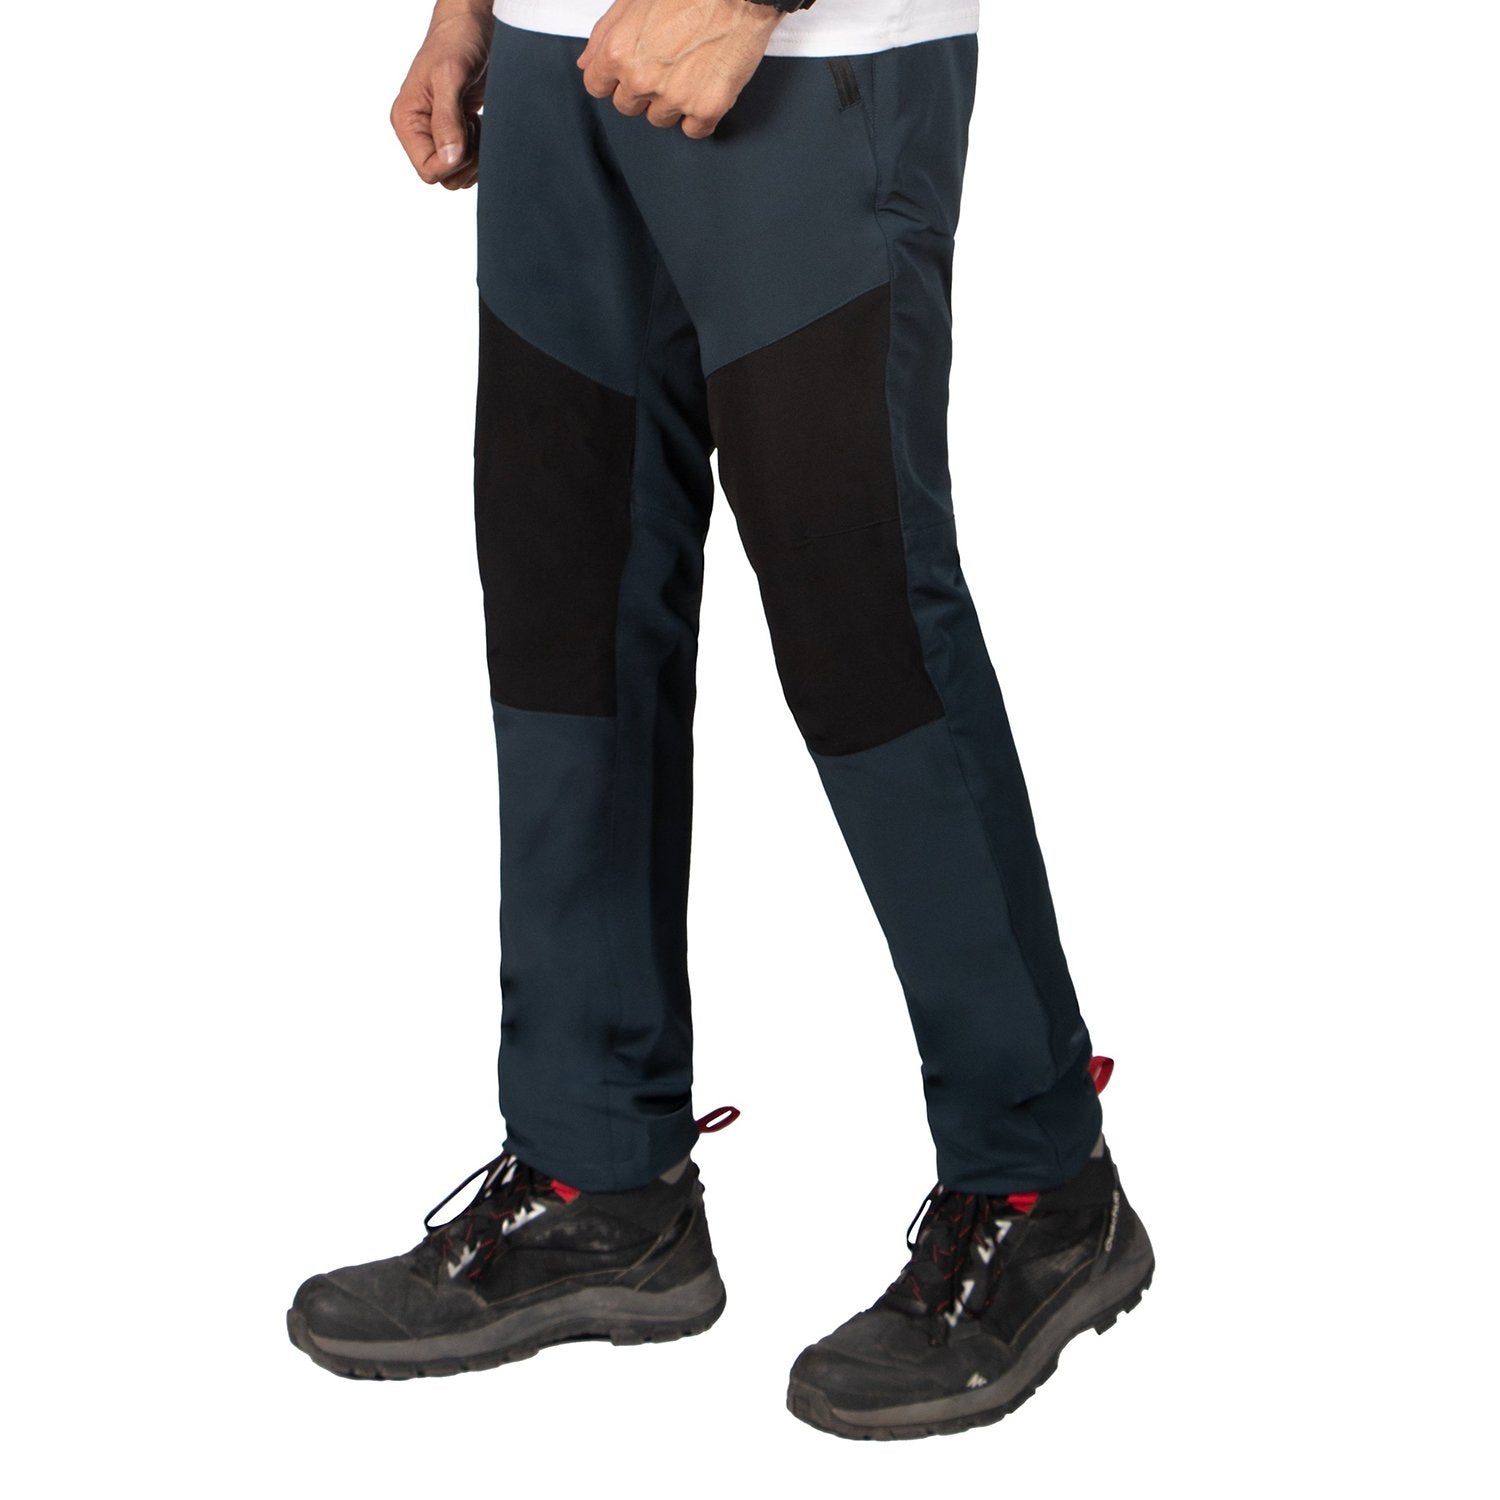 Buy Manali All Weather Trekking Pants at Gokyo Outdoor Clothing & Gear